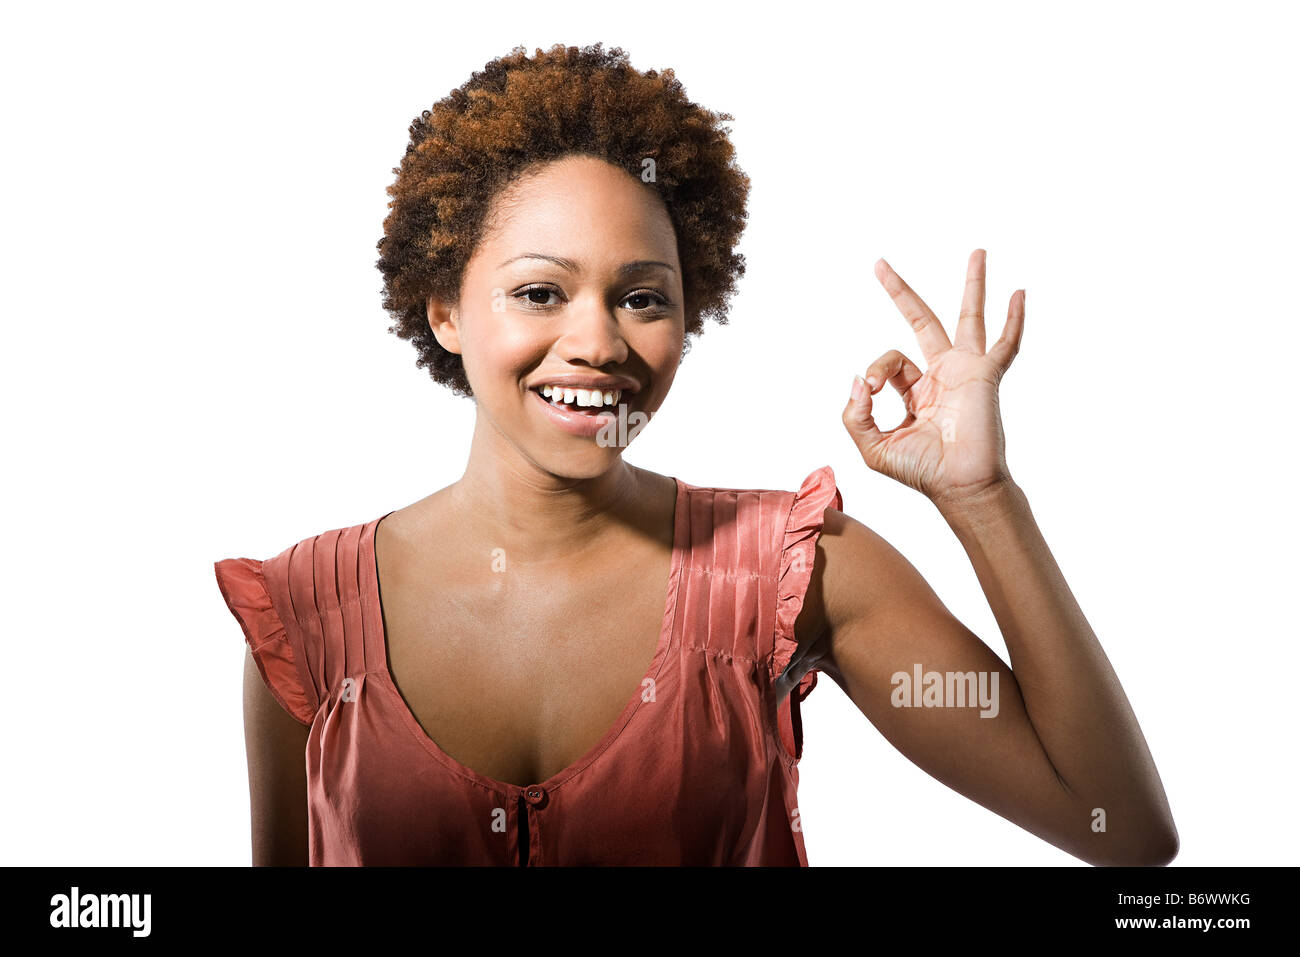 Portrait of young woman giving the ok sign Stock Photo